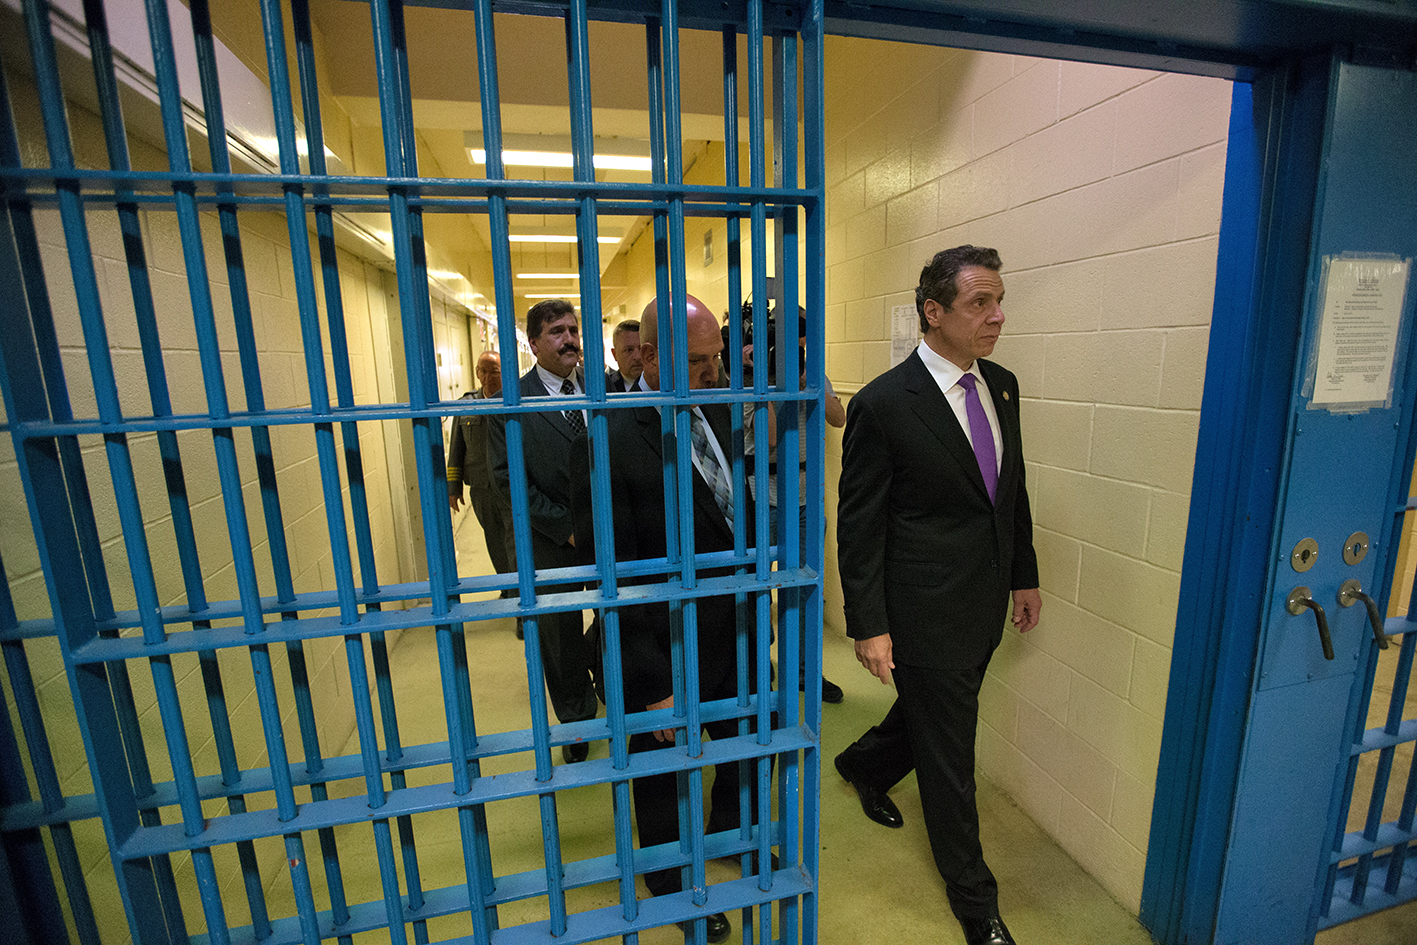 May 28, 2015-Coxsackie, NY- Governor Andrew M. Cuomo tours the Special Hous...